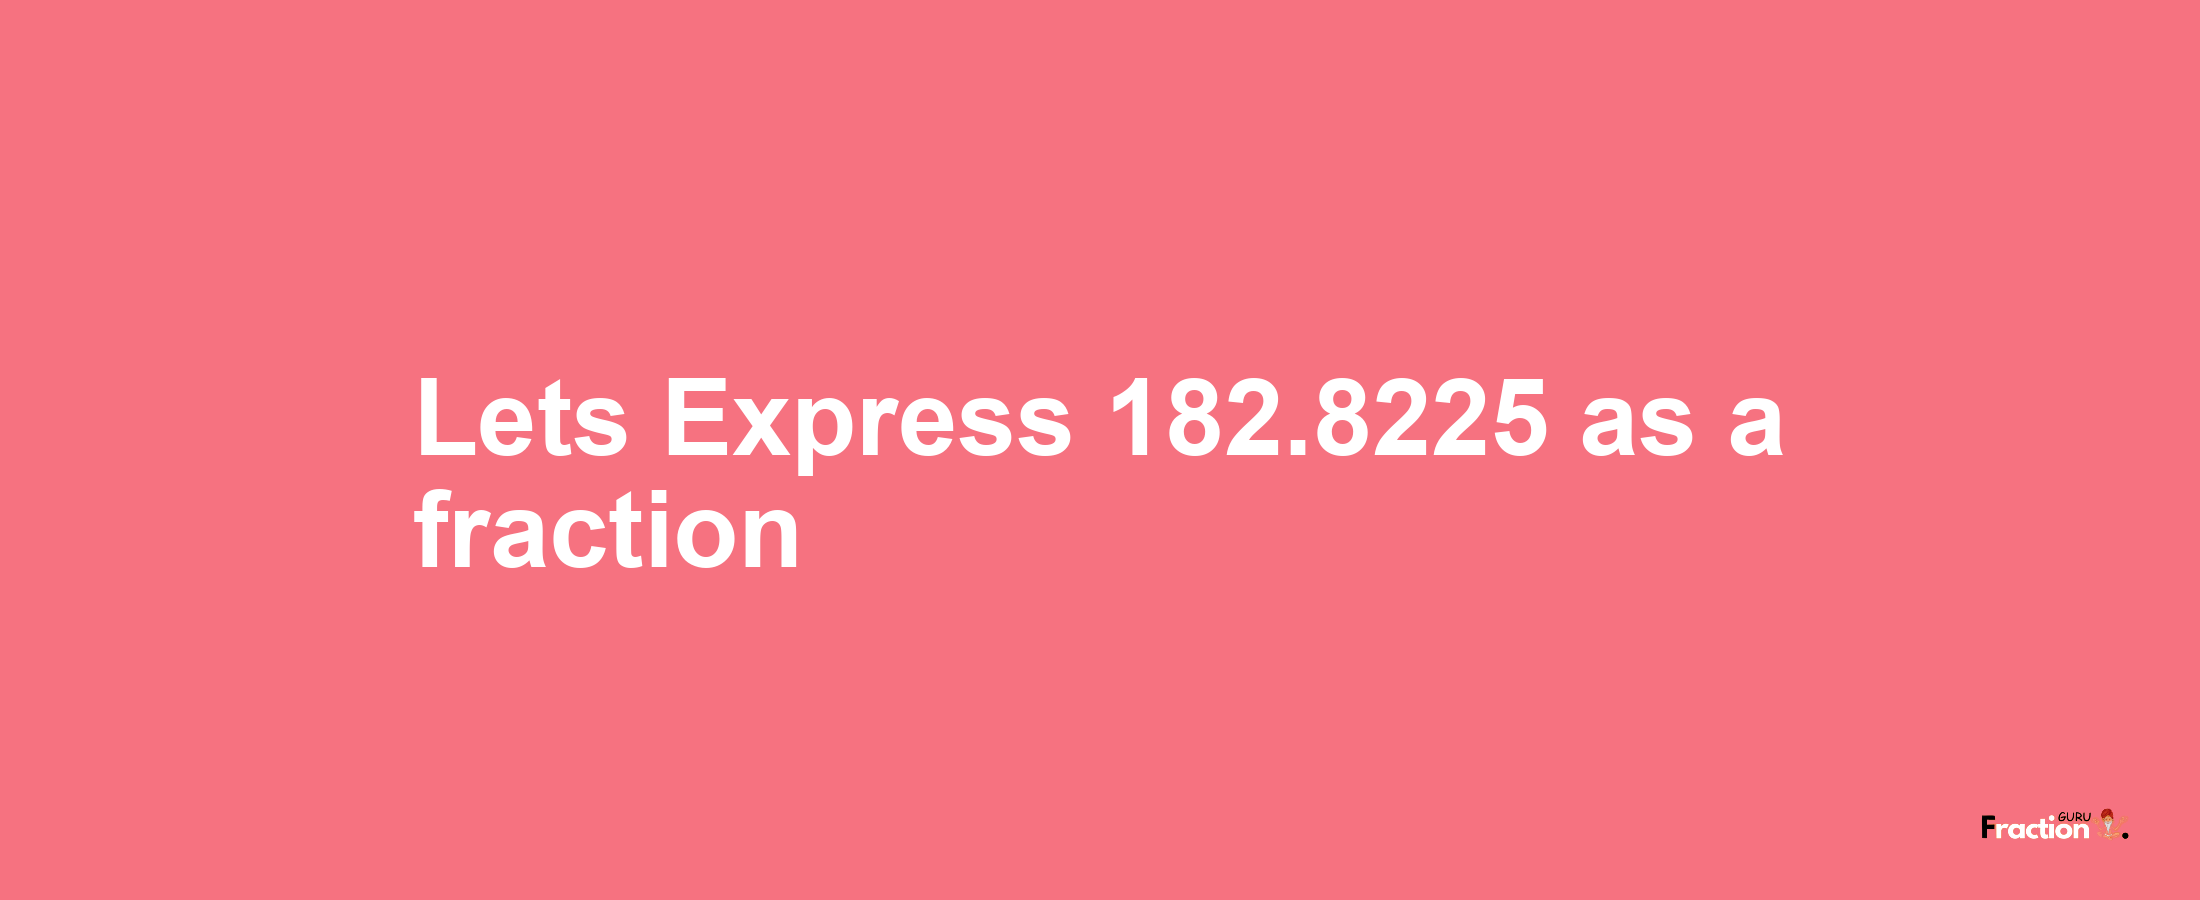 Lets Express 182.8225 as afraction